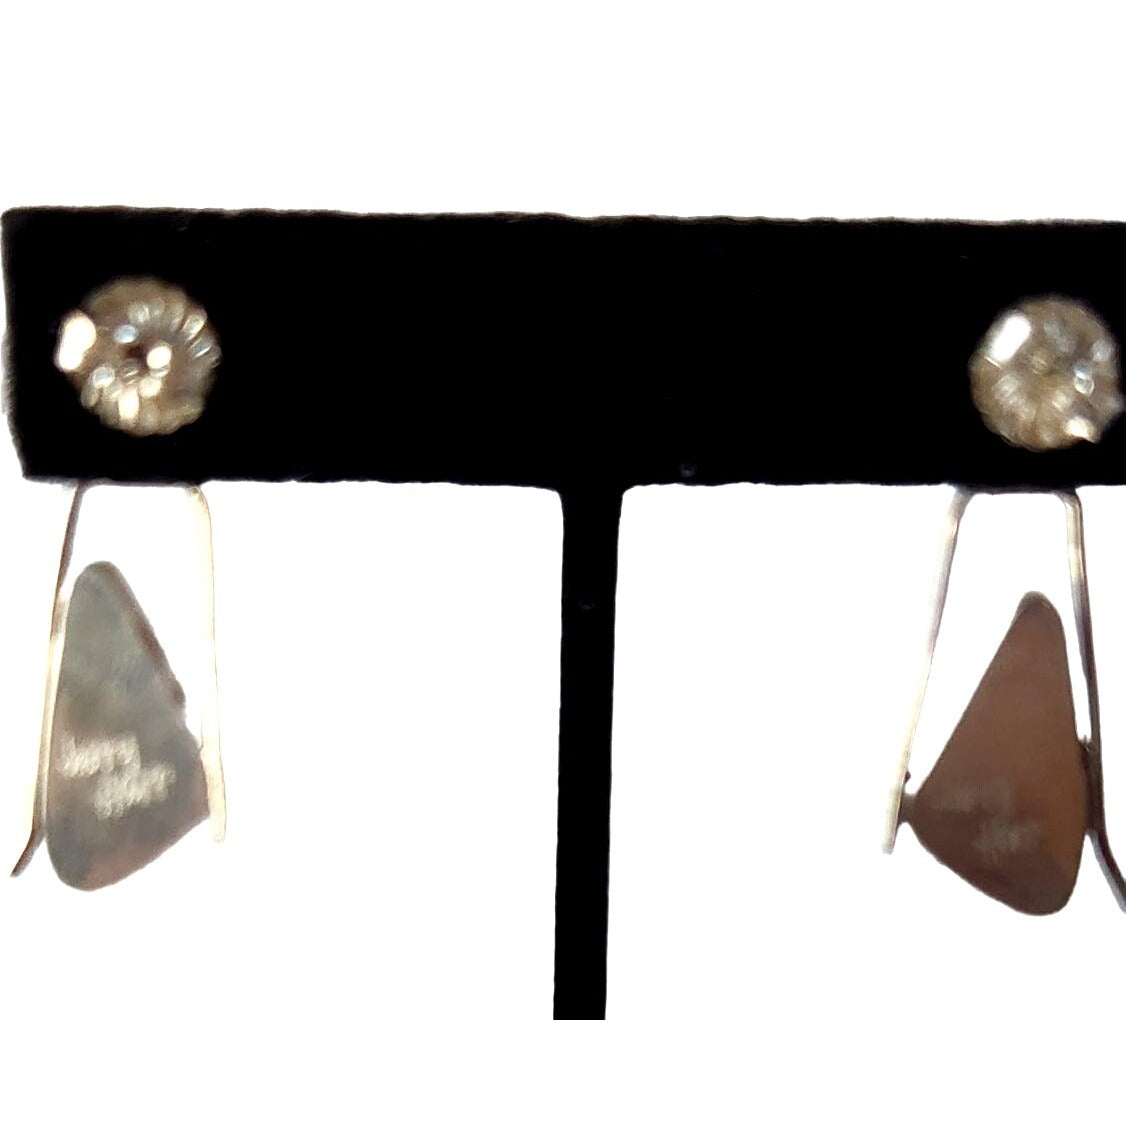 Earrings Orca Agate 925 Silver 7.4 Grams 2 Stone Hanging Post Earrings Top 12mm x 8mm Bottom Stone 20mm x 10mm 35mm x 15mm